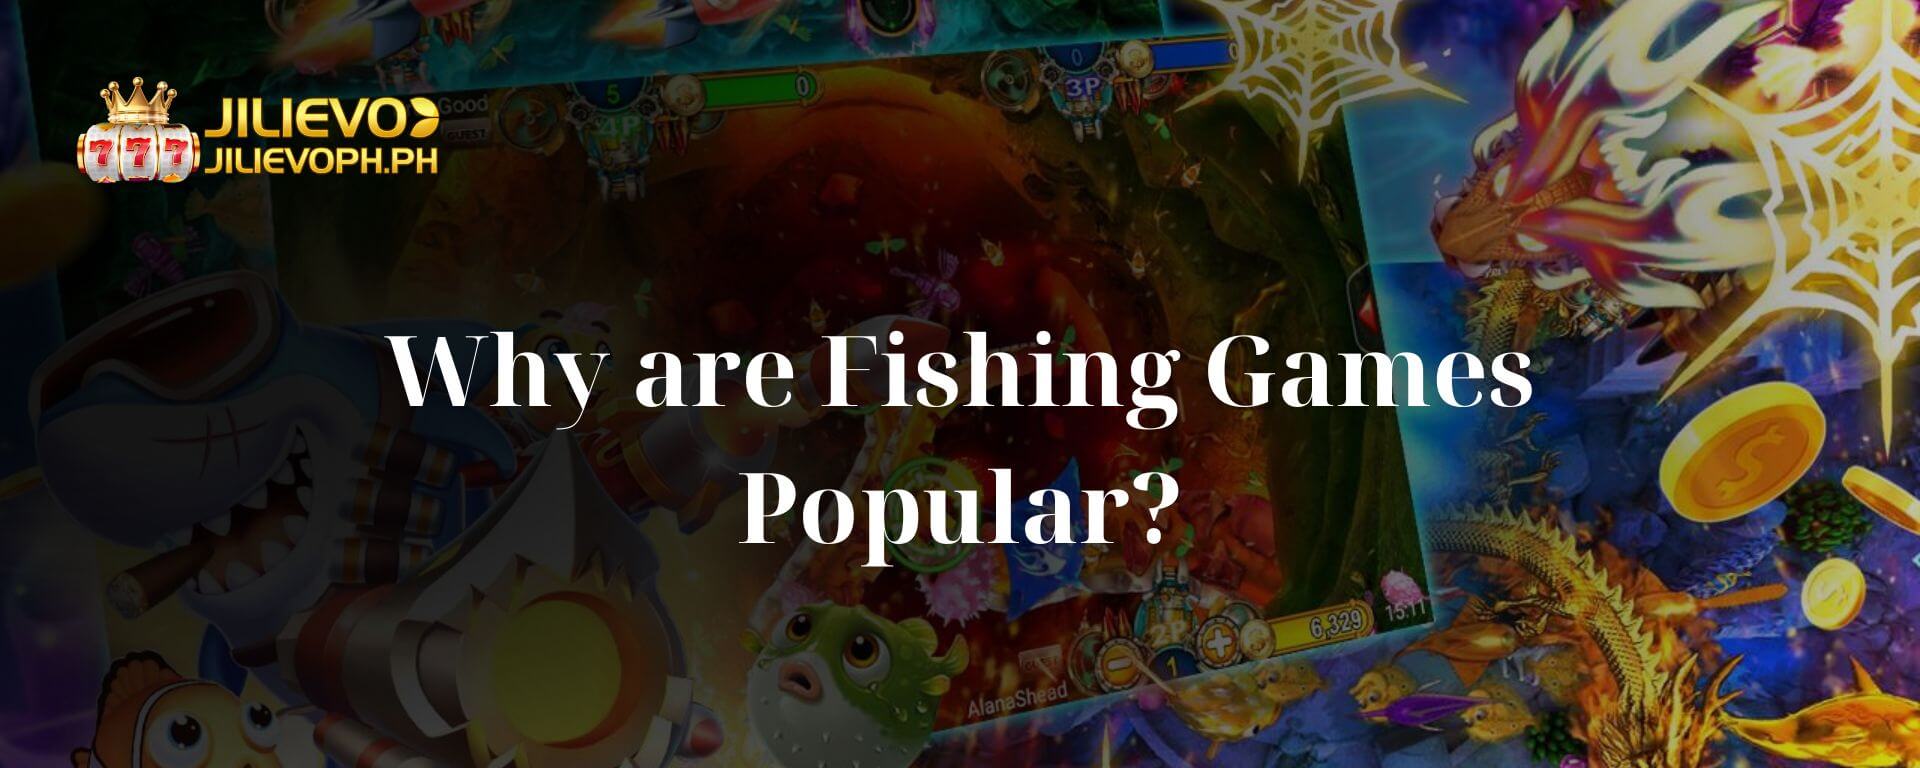 Why are Fishing Games Popular?